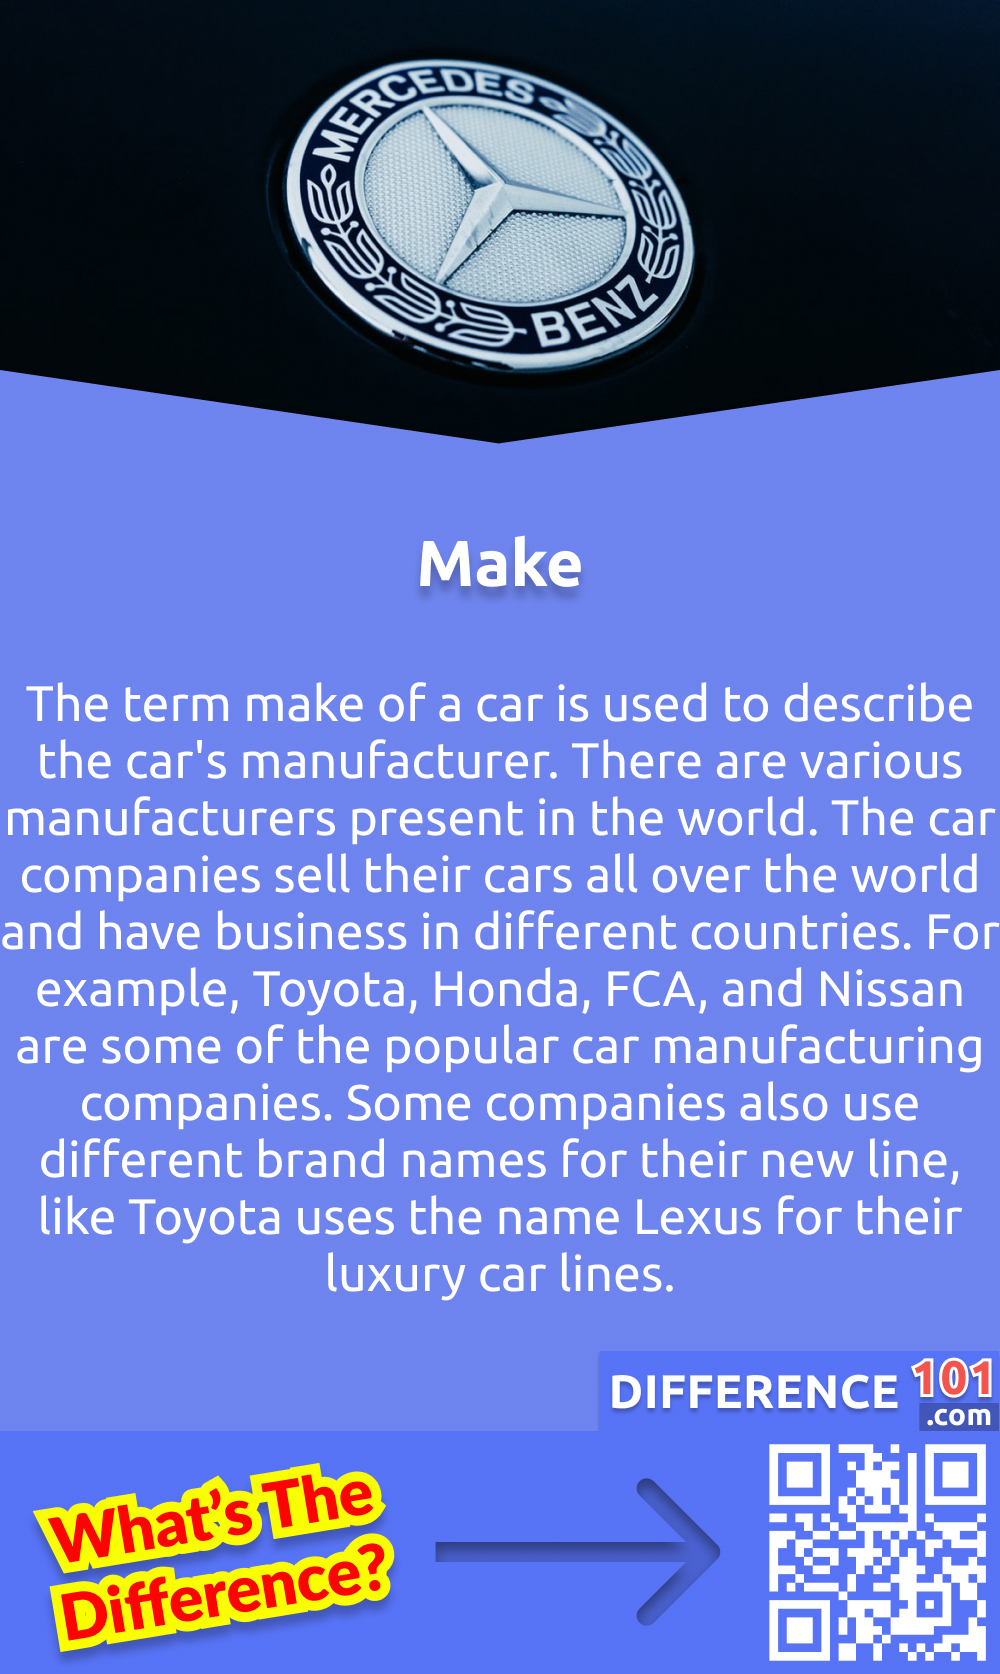 What is the make of a car? The term make of a car is used to describe the car's manufacturer. There are various manufacturers present in the world. The car companies sell their cars all over the world and have business in different countries. For example, Toyota, Honda, FCA, and Nissan are some of the popular car manufacturing companies. Some companies also use different brand names for their new line, like Toyota uses the name Lexus for their luxury car lines.